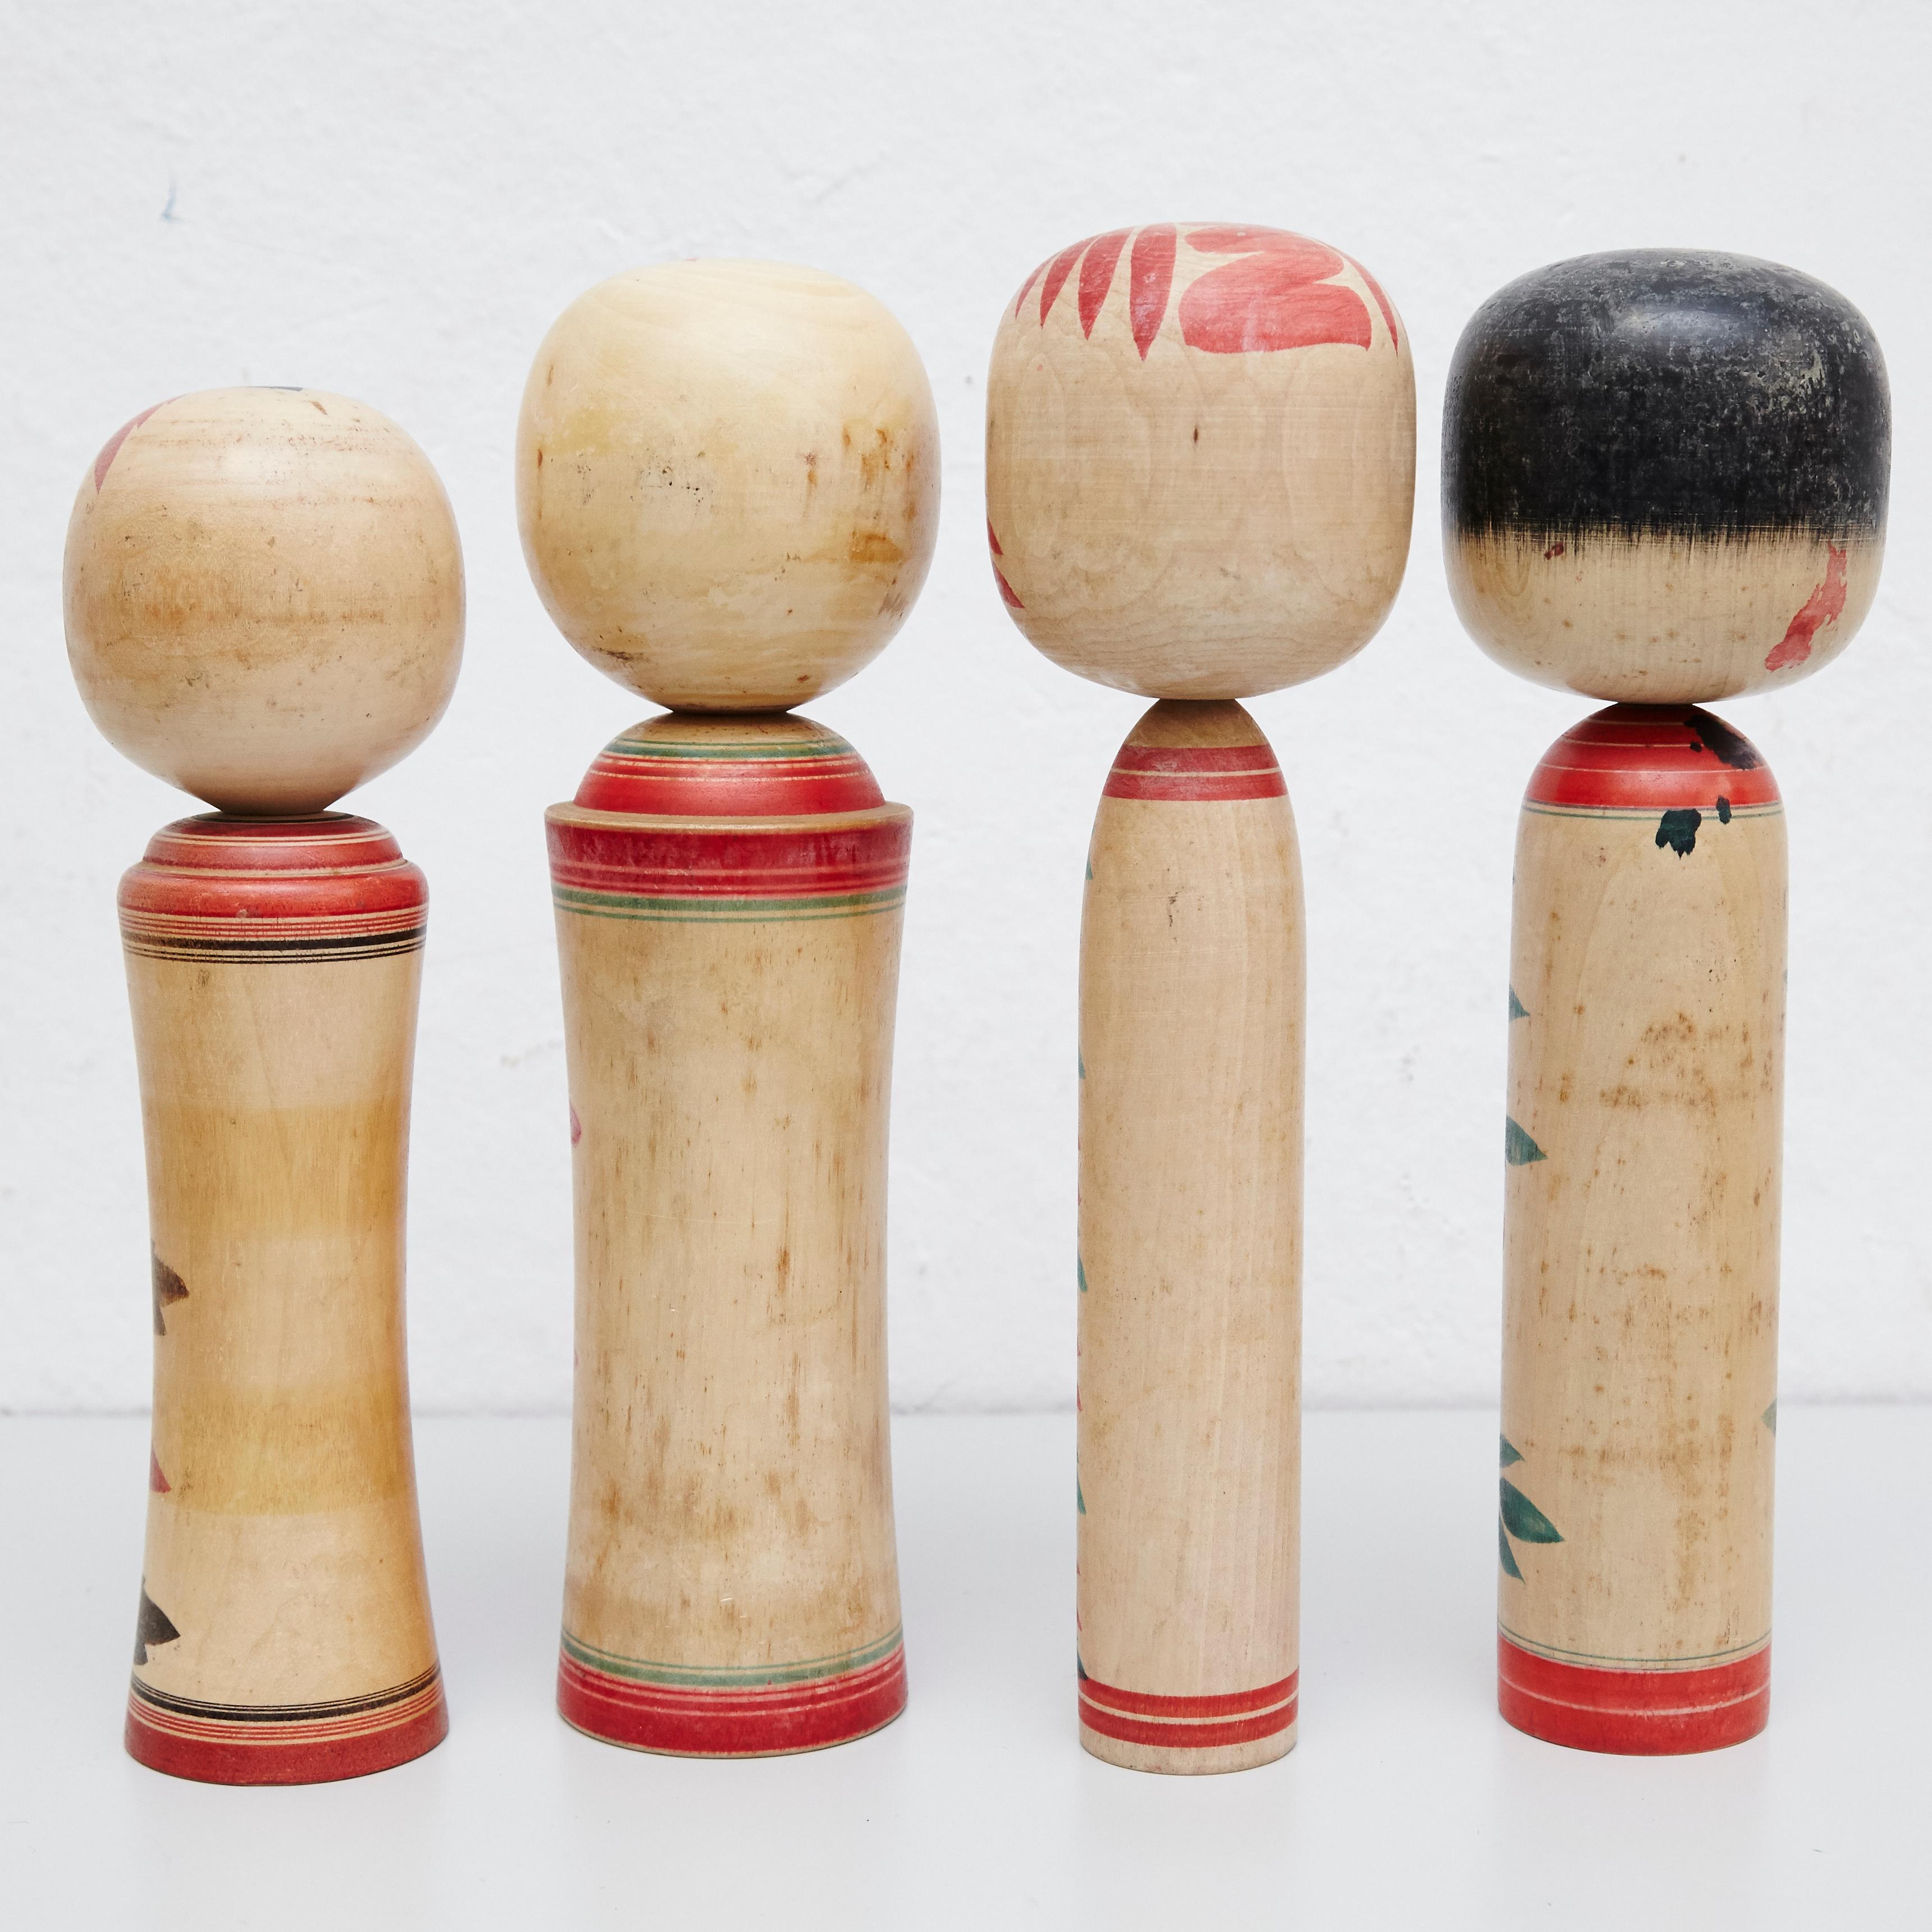 Japanese dolls called Kokeshi of the early 20th century.
Provenance from the northern Japan.
Set of 4.

Measures: 

30 x 9.5 cm
31 x 9, cm
30 x 8.5 cm
27.5 x 8 cm

Handmade by Japanese artisants from wood. Have a simple trunk as a body